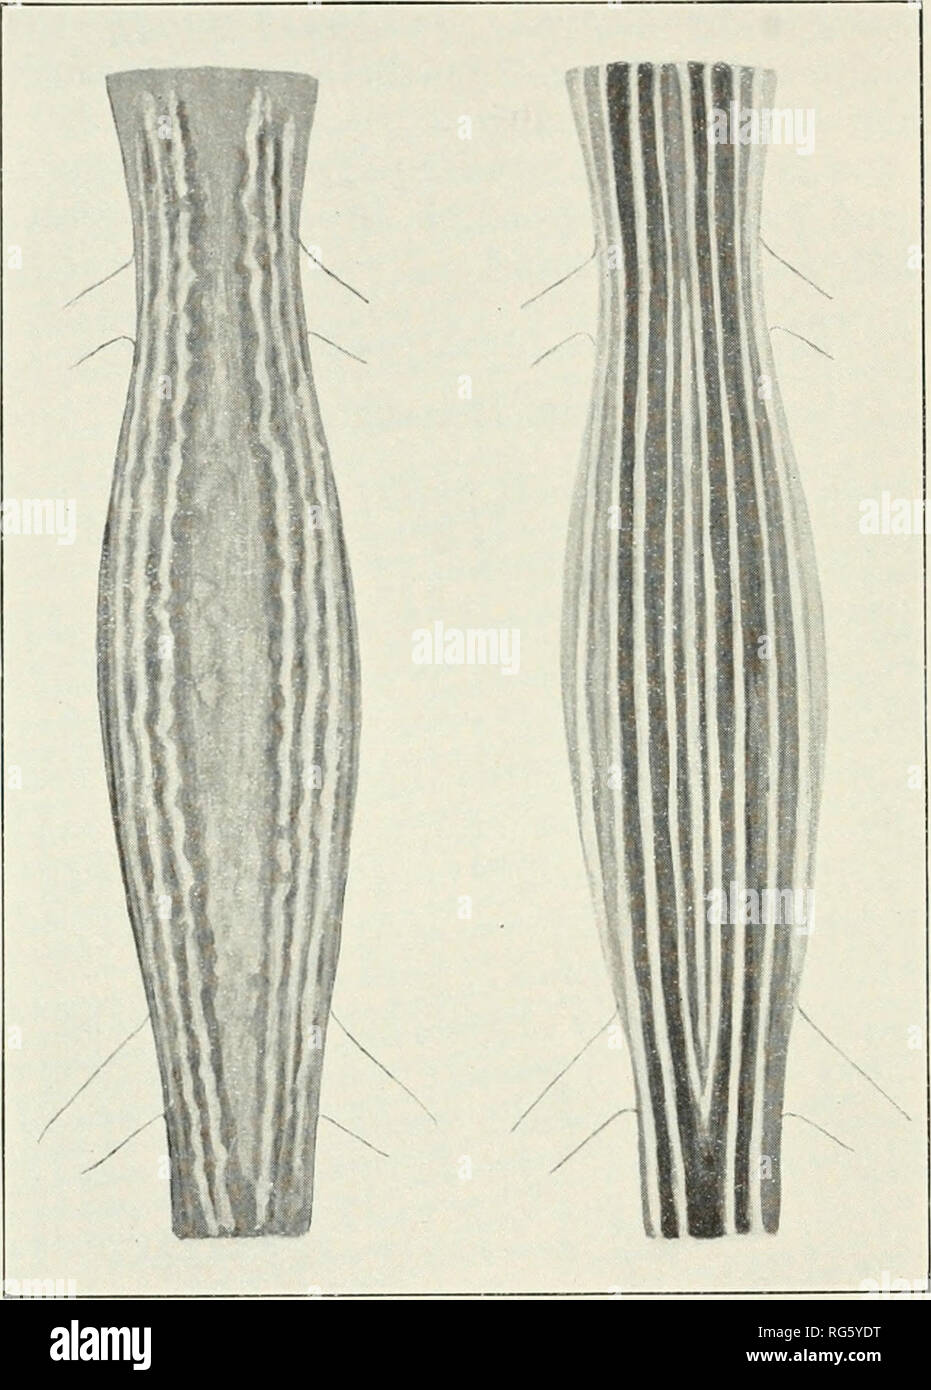 . Bulletin - United States National Museum. Science. 64 BULLETIN ]5 4, UNITED STATES NATIONAL MUSEUM antebrachials at a point of contact; postantebracliium covered with small or slightly enlarged grannies; feniorals G-10; tibials 2-4; femoral pores 15-19; tail elongate tapering; candals moderate, lateran and dorsal keels weak, and more or less irregularly arranged.. FiGUUE 14. COMPAKISON OF TYPICAL COLOU rATTEUN OF CXEillDO- phorus deppi cozumelcs (leb't) and c, deppii deppii (right). Note the wider middorsal band and wavy lateral stripes i. cozu.melus Coloration distinctive; lower surfaces w Stock Photo